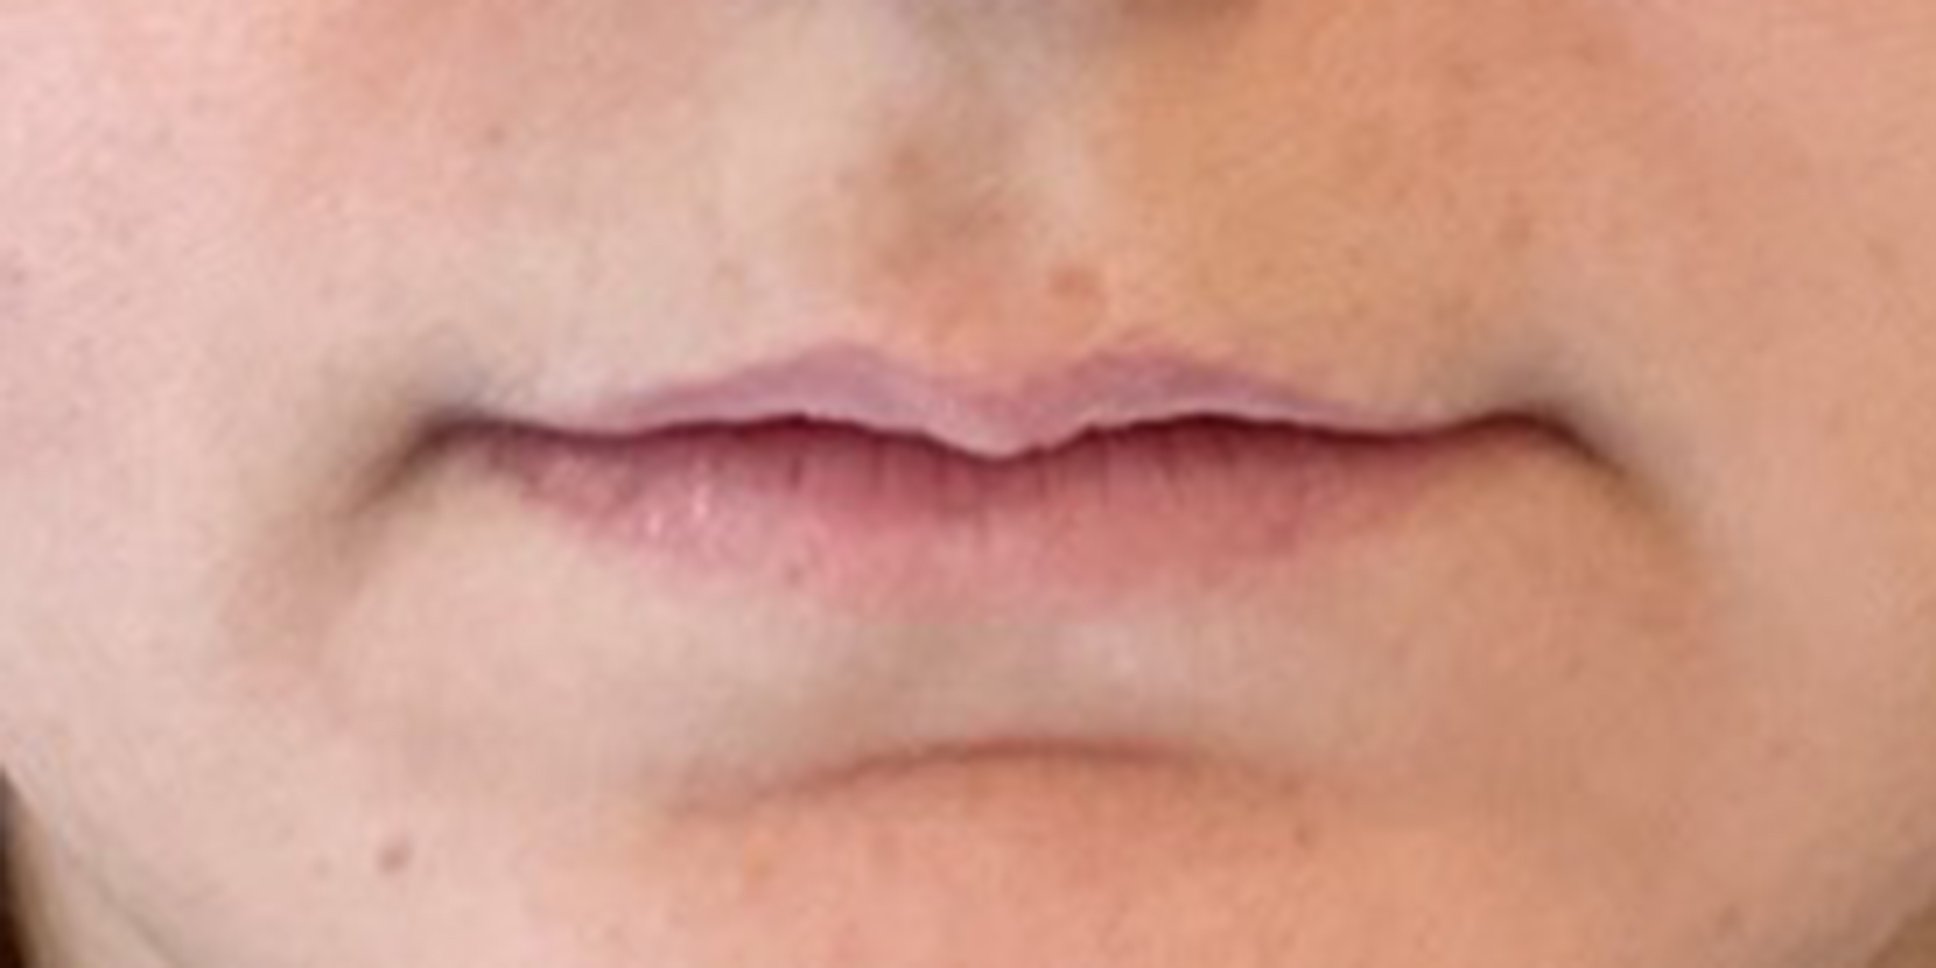 Before Lip Filler Injections